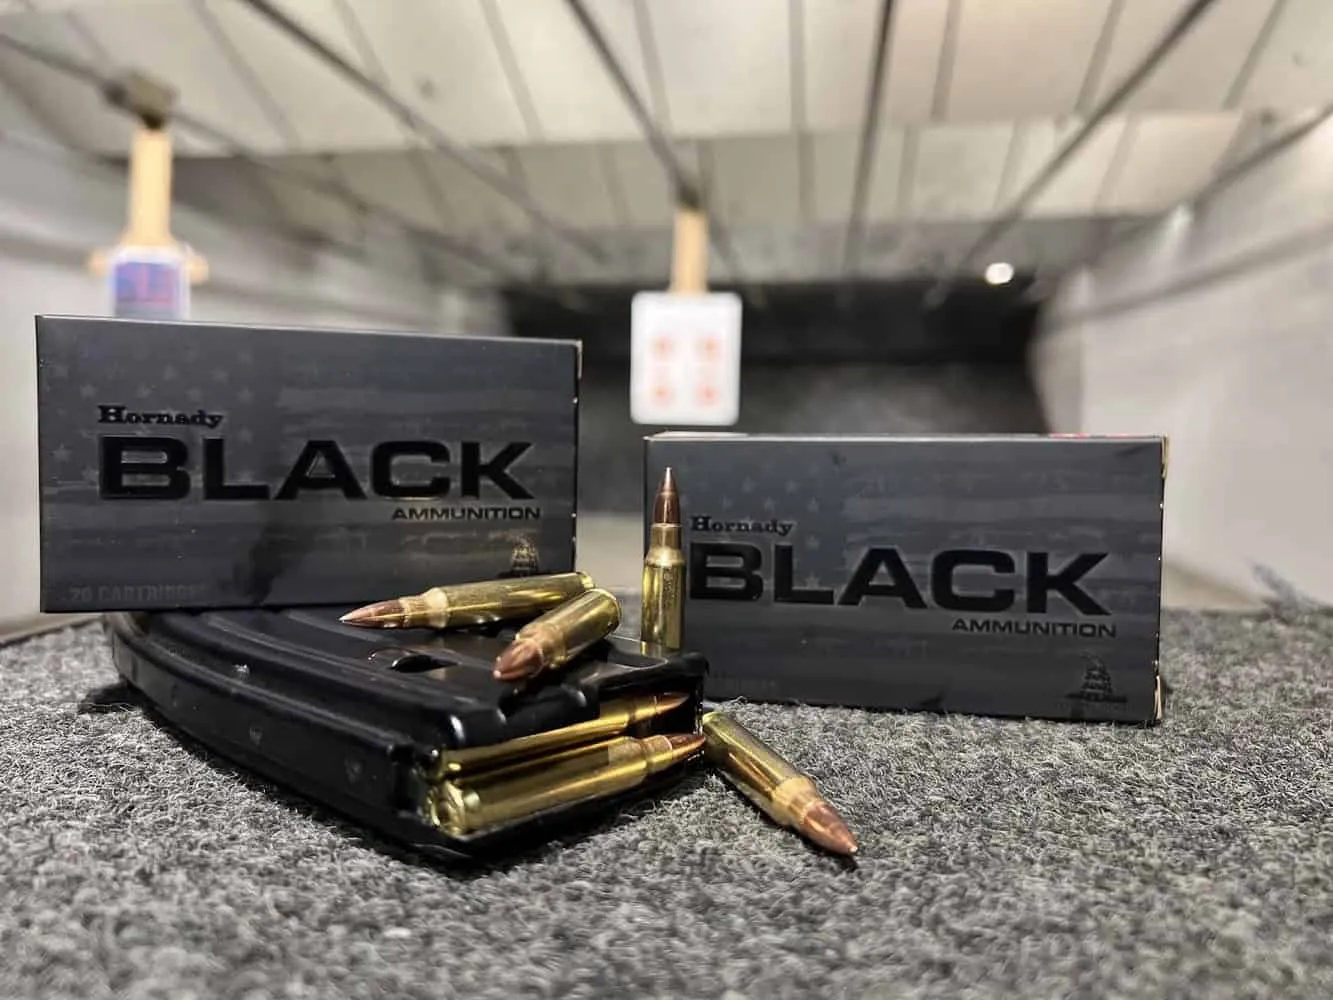 hornady black ammo used for the Primary Arms microprism test